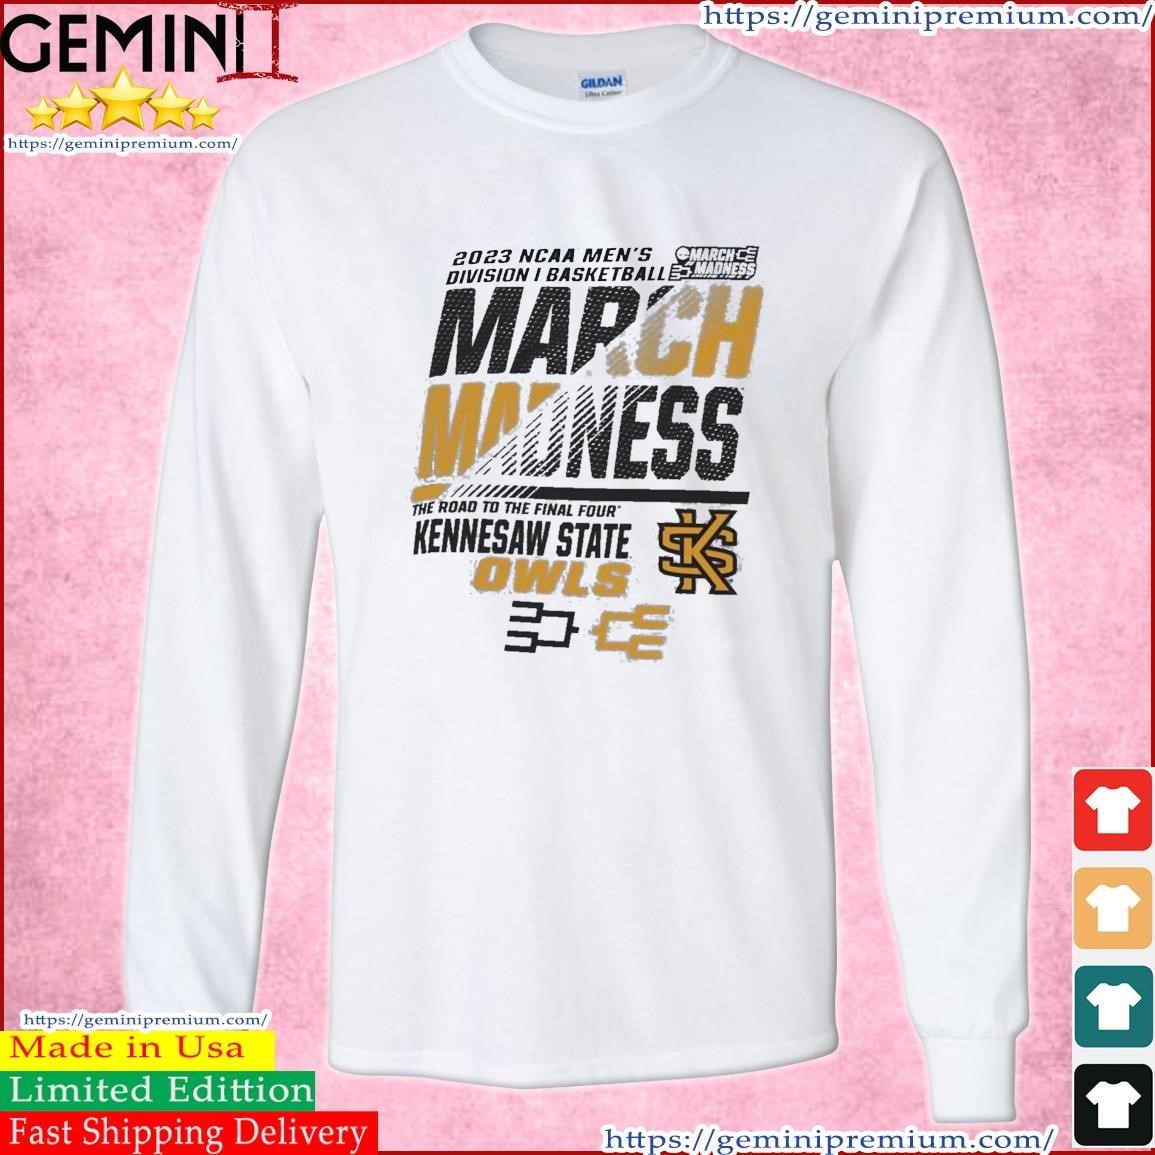 Kennesaw State Owls Men's Basketball 2023 NCAA March Madness The Road To Final Four Shirt Long Sleeve Tee.jpg